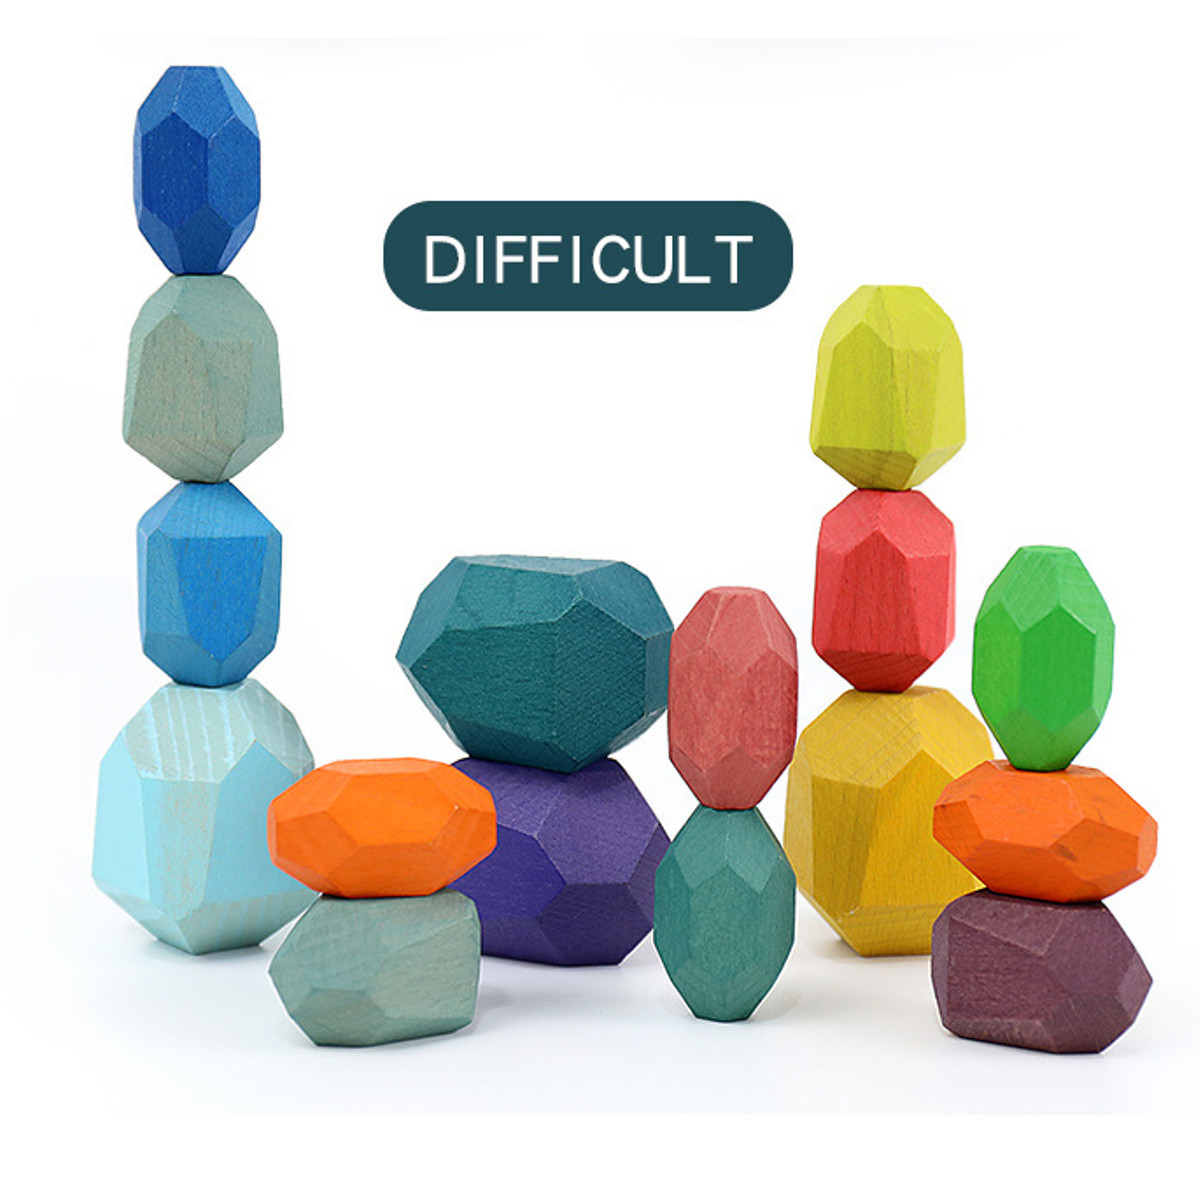 101626-Pcs-Wood-Colorful-Stone-Stacking-Game-Building-Block-Education-Set-Toy-for-Kids-Gift-1887123-10